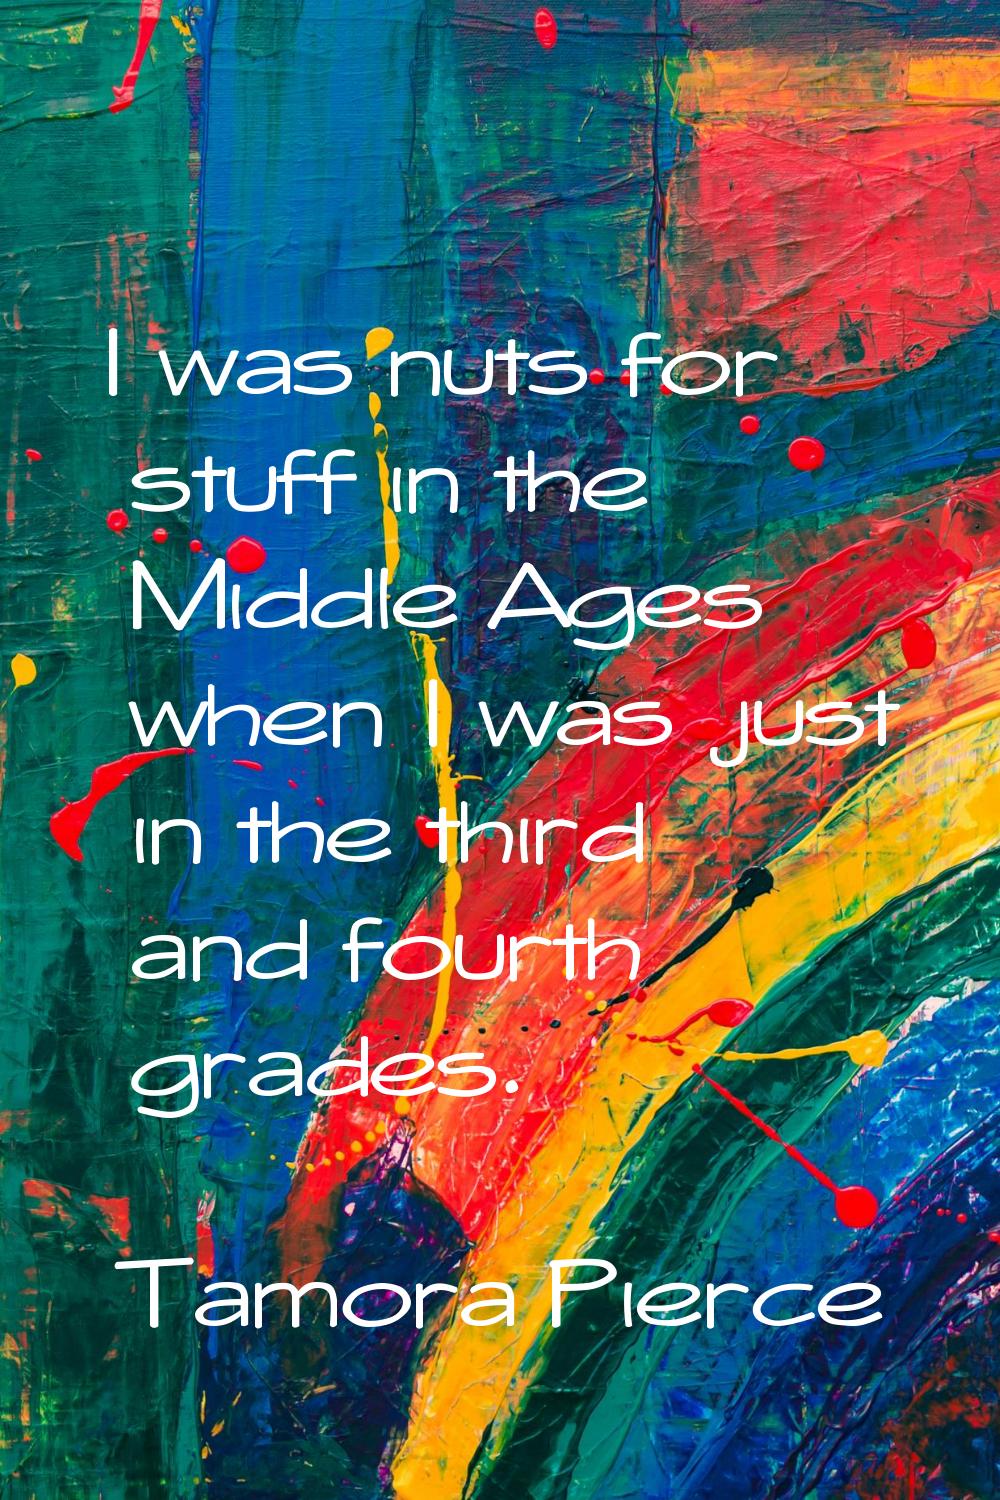 I was nuts for stuff in the Middle Ages when I was just in the third and fourth grades.